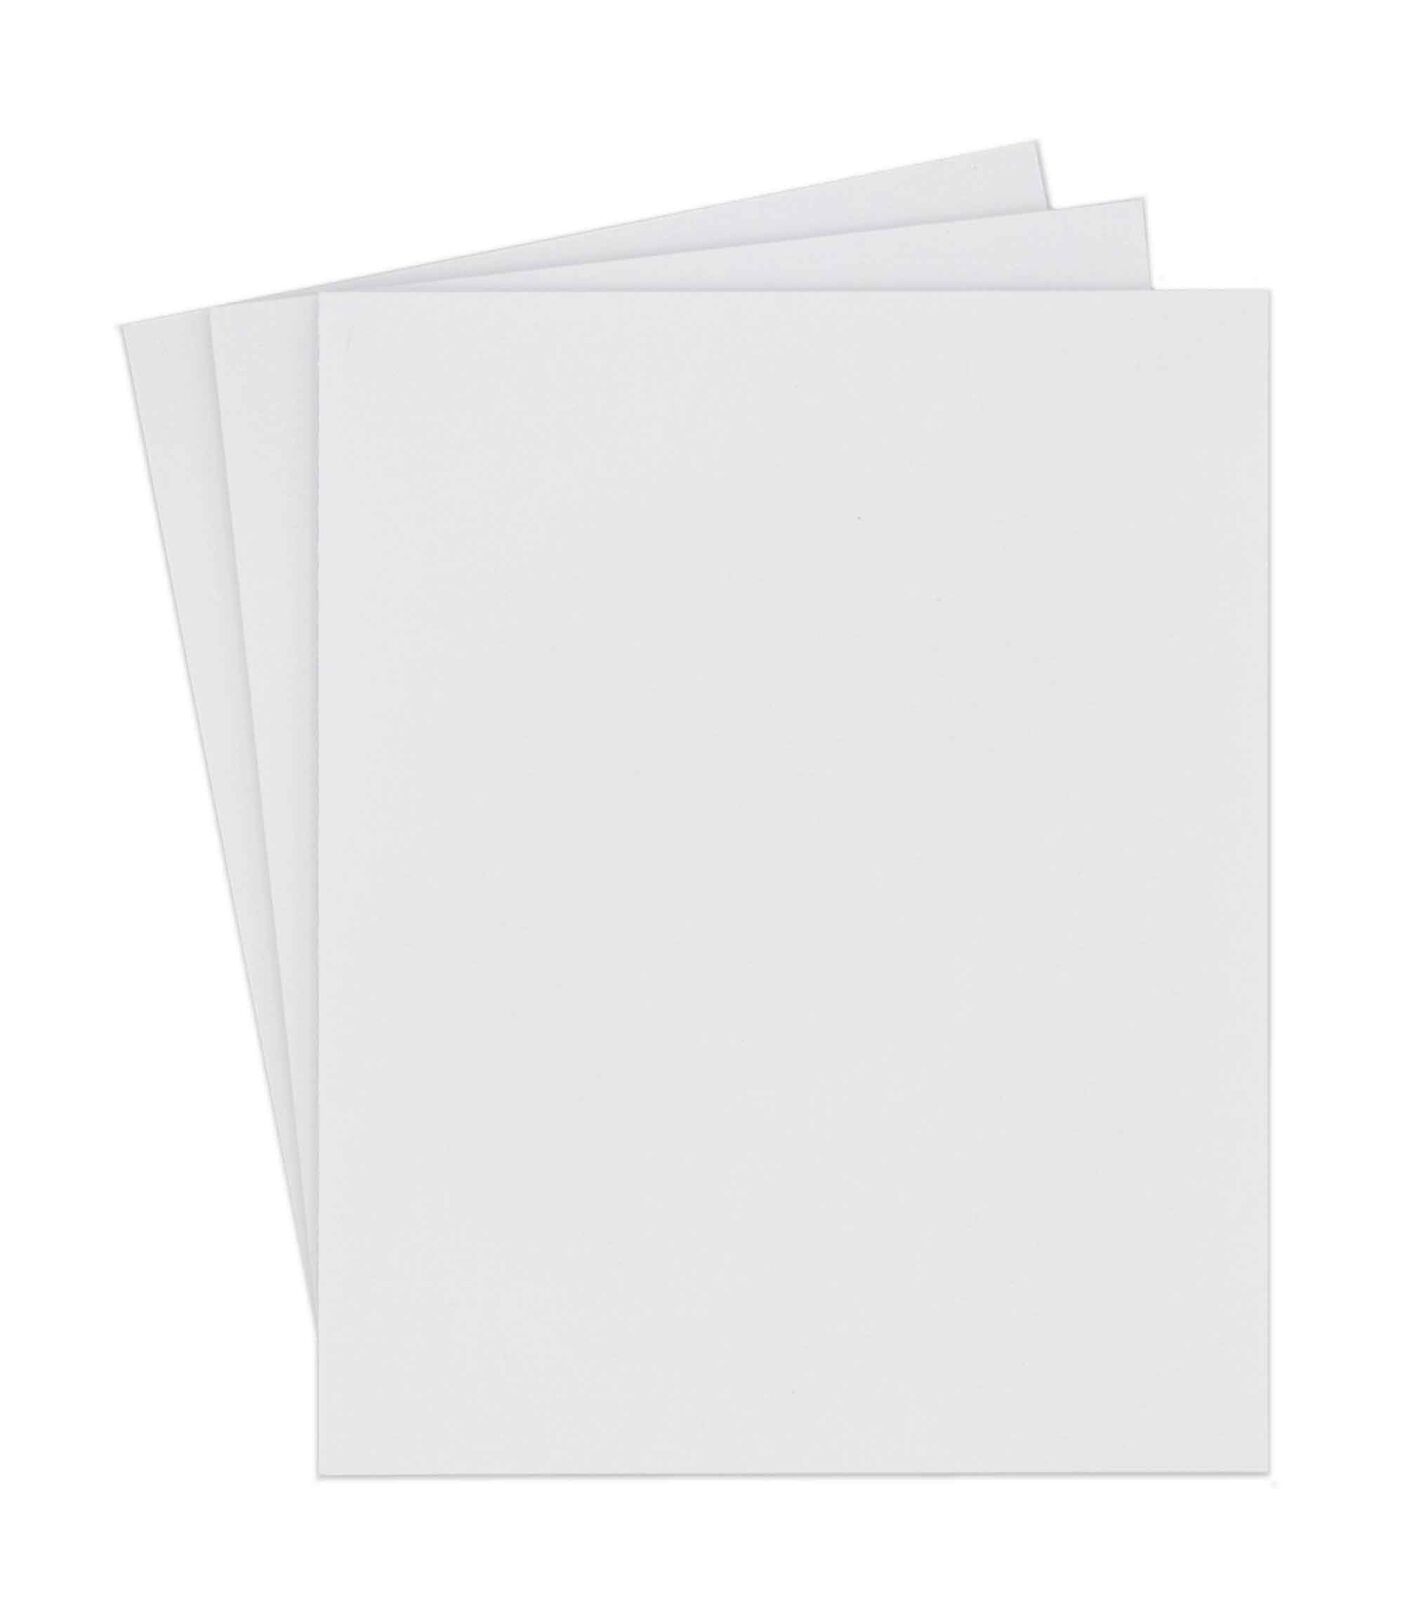 24x36 White Foam Board Single Sheet Acid Free For Crafts and Picture Frames